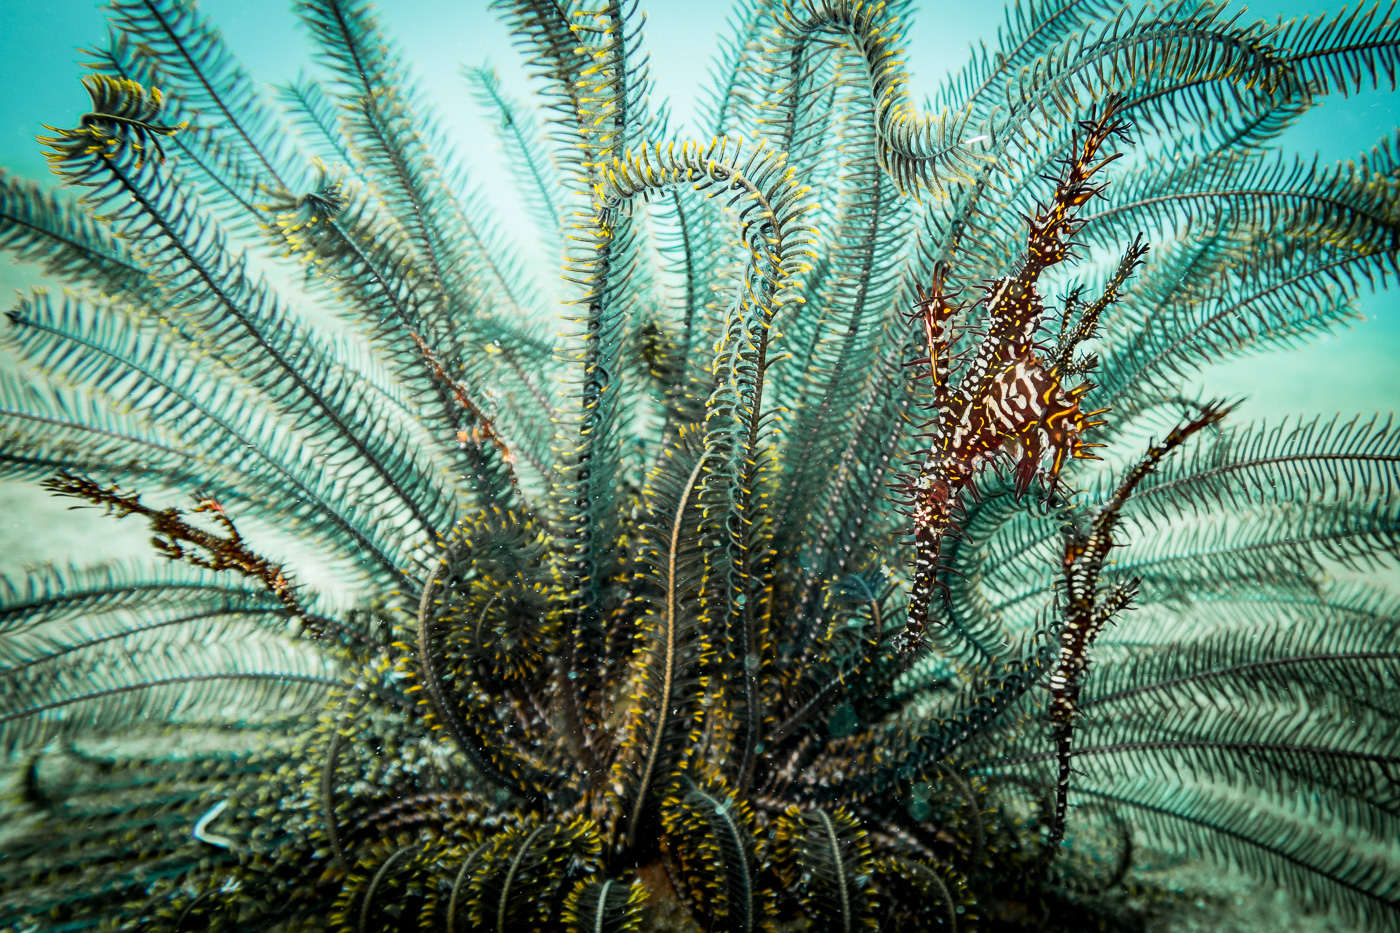 Five ornate ghost pipefish on one soft coral during our Dauin muck dive in Negros, Philippines